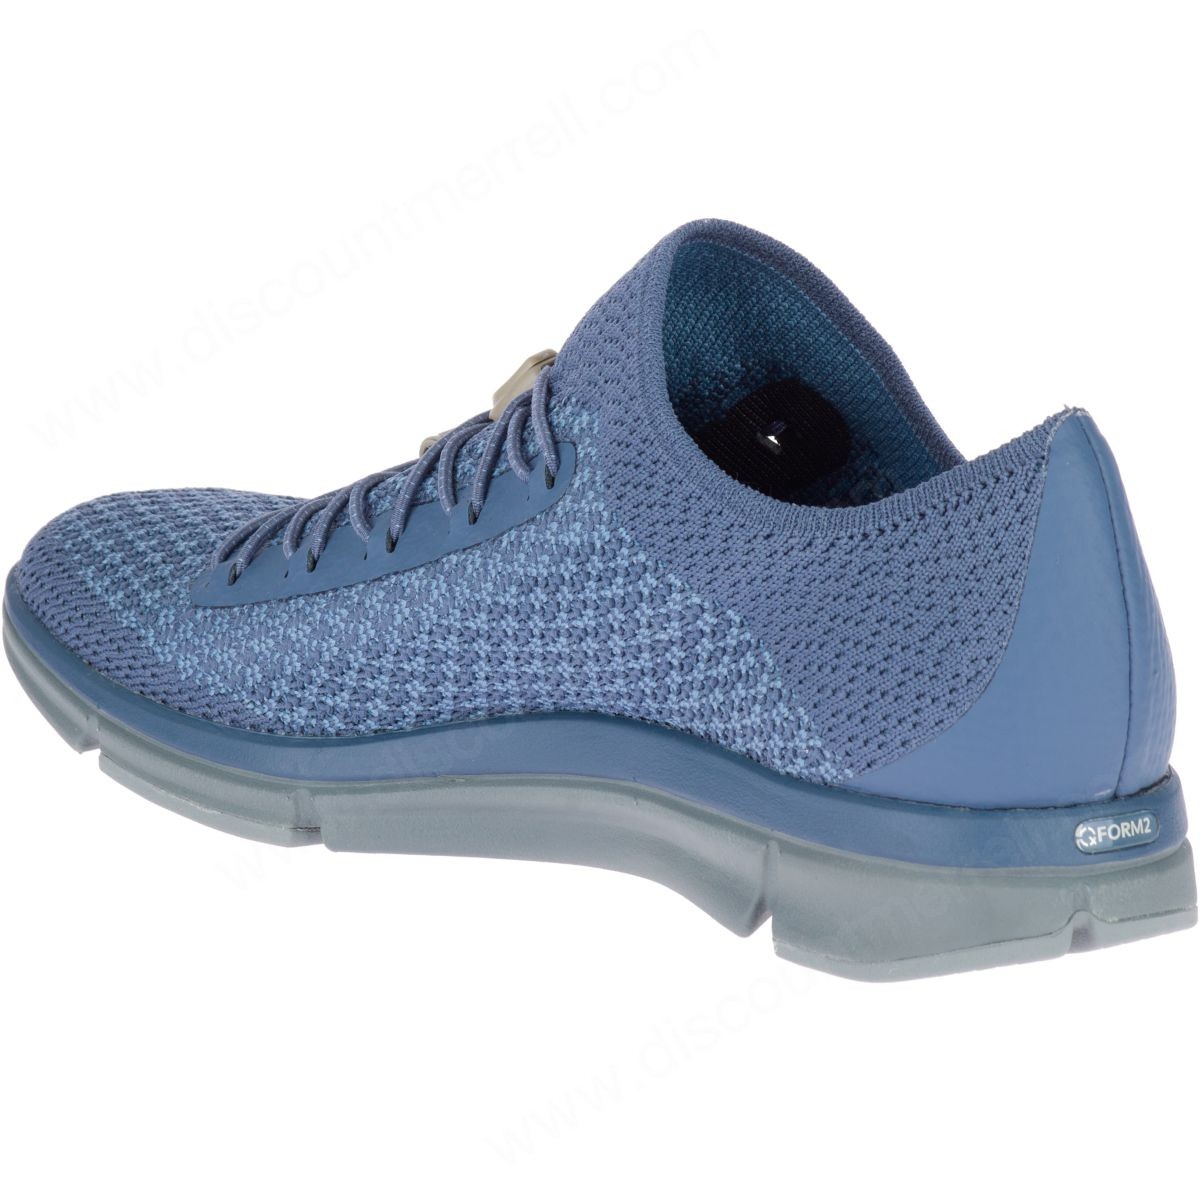 Merrell Womens's Zoe Sojourn Lace Knit Q2 Bering Sea - -6